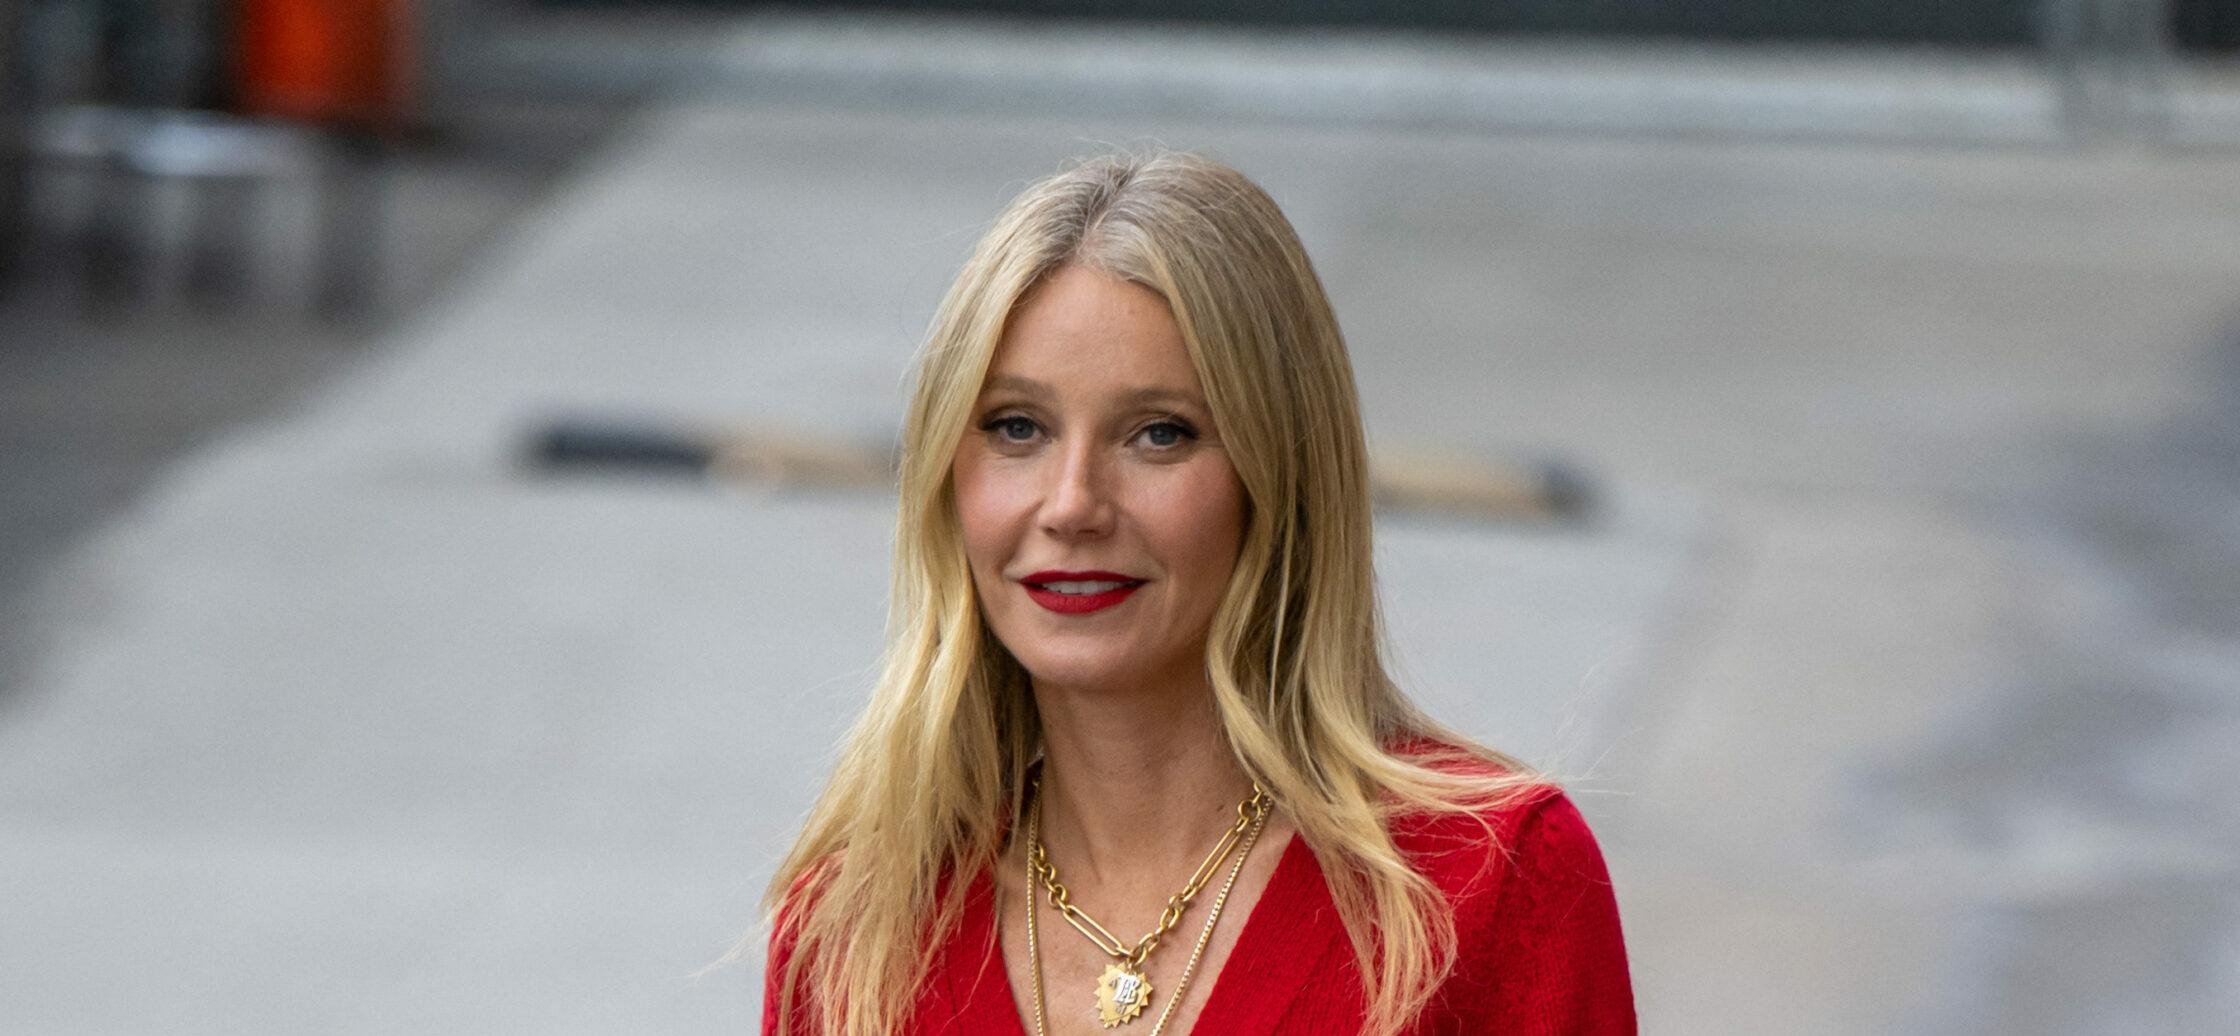 Gwyneth Paltrow Responds To Backlash Over Controversial Eating Regimen